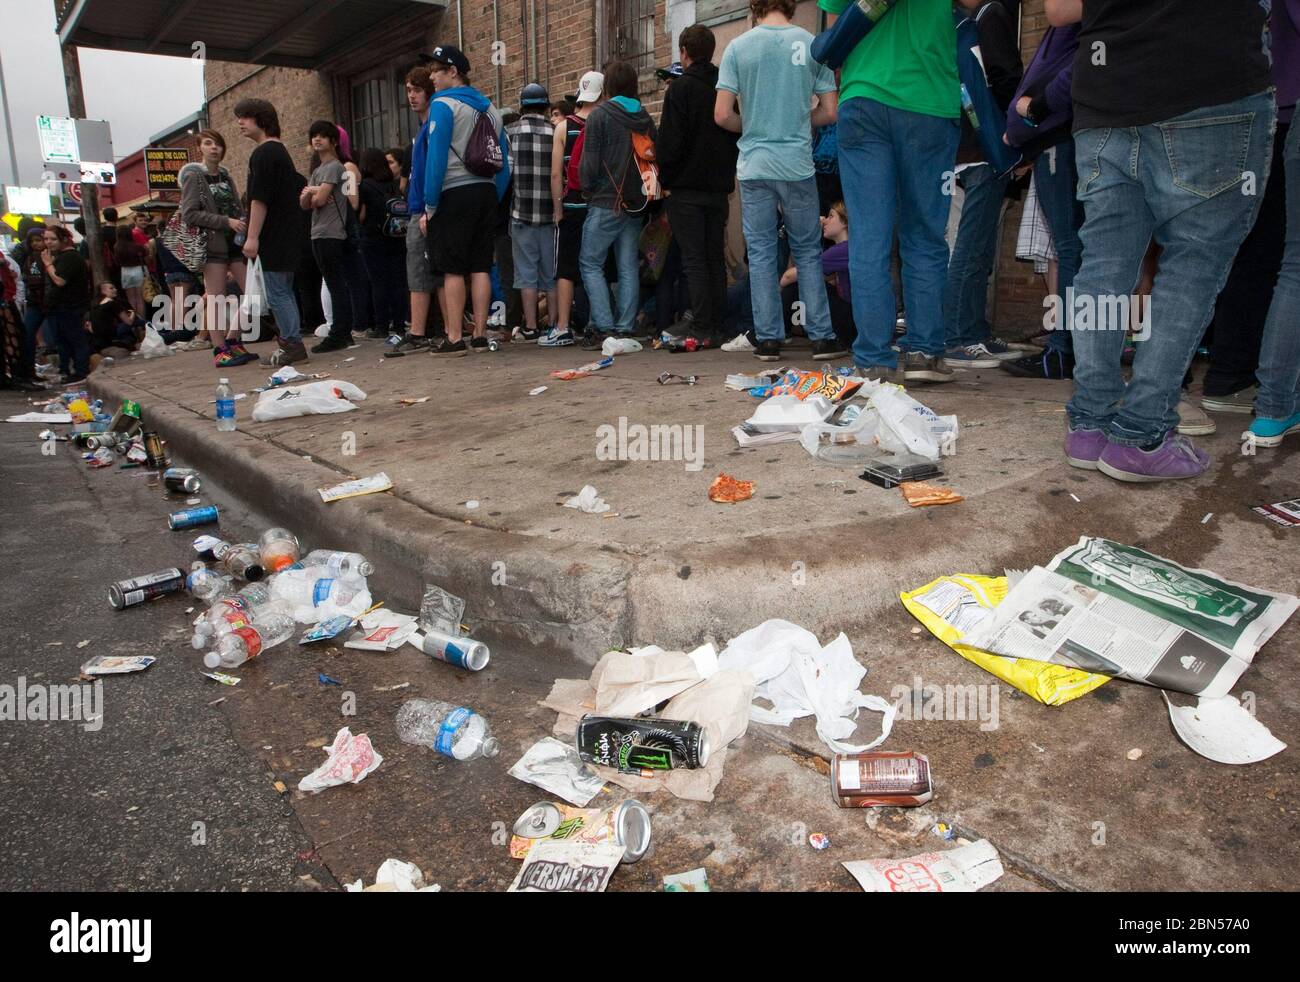 Austin Texas USA, March 2012: Garbage piles up in the street and on the sidewalk as young music fans stand in line outside a music venue waiting to hear bands during the South by Southwest Music Conference. ©Marjorie Kamys Cotera/Daemmrich Photography Stock Photo